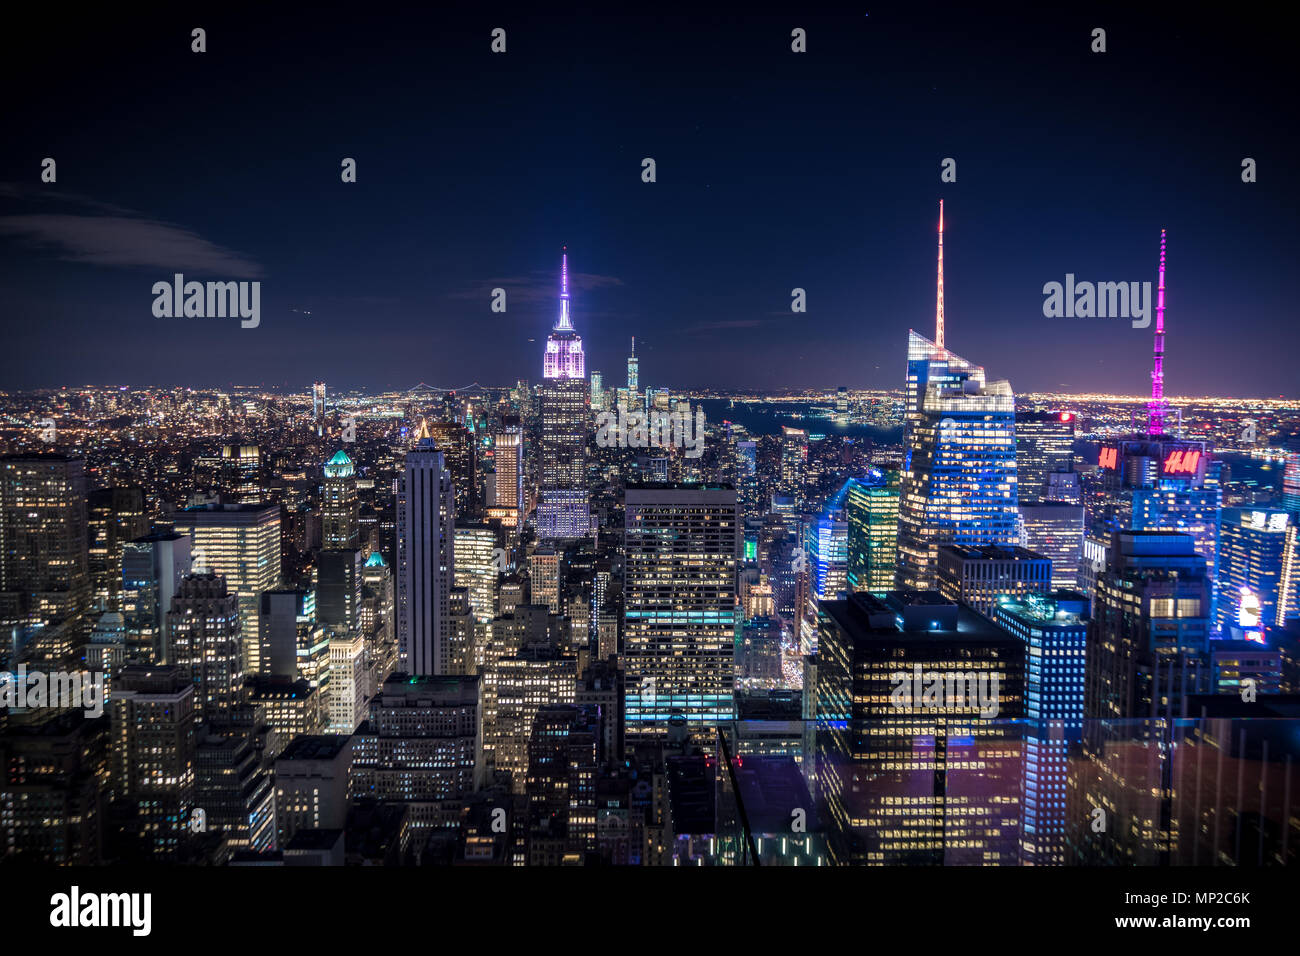 new York, US - March 30, 2018: View of New York lights and skyline at night Stock Photo